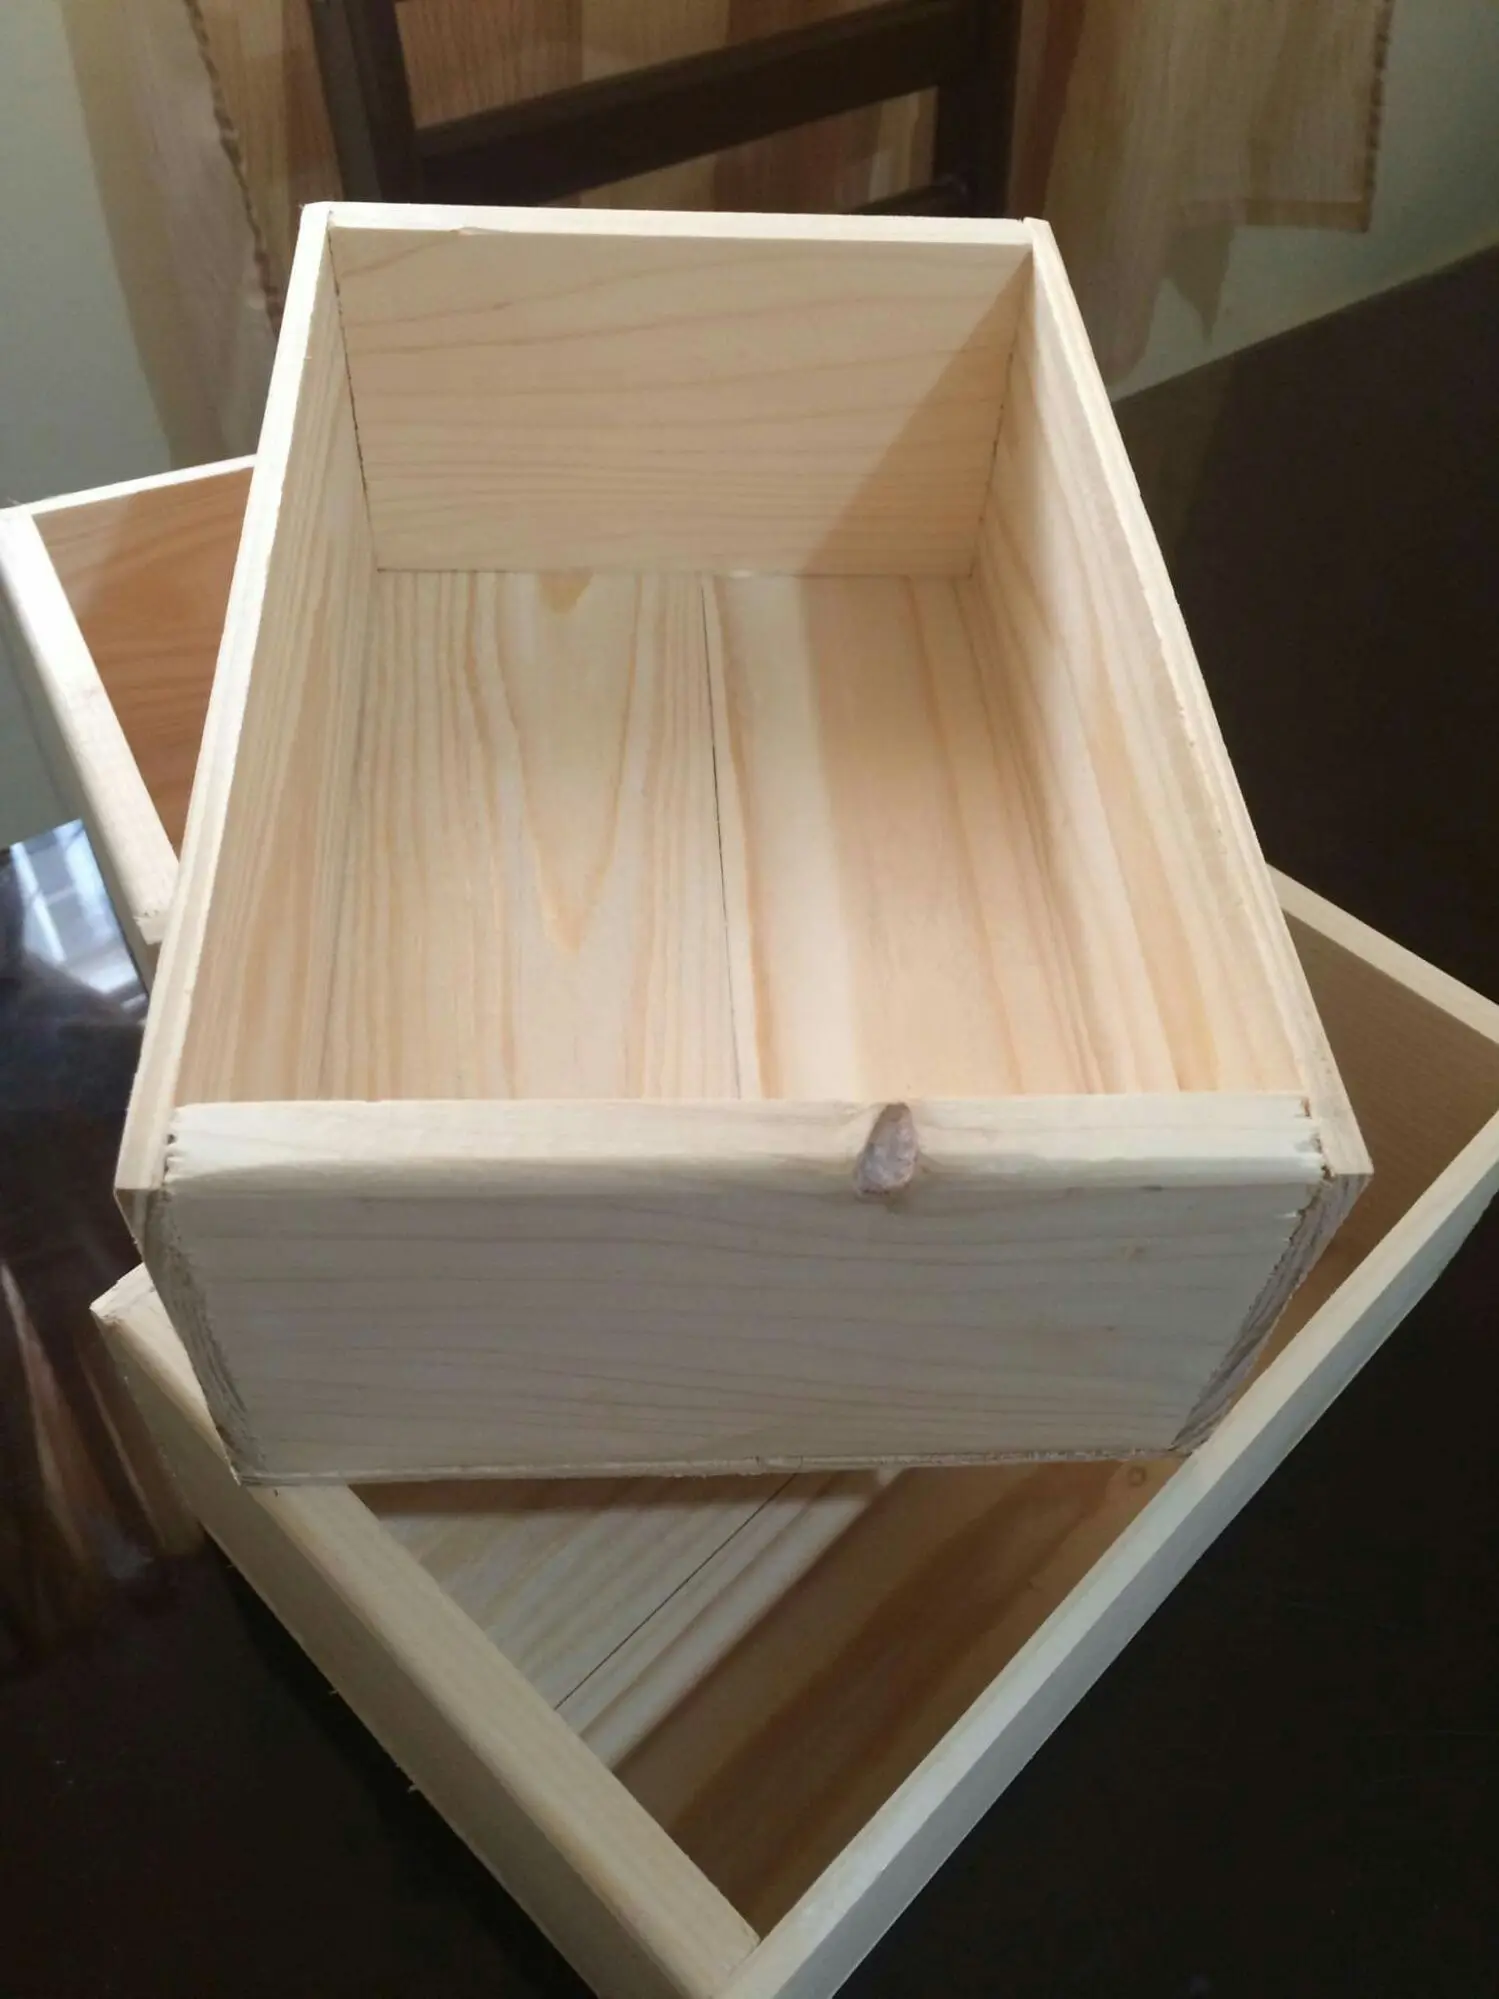 wooden crate / storage crate / travel crate